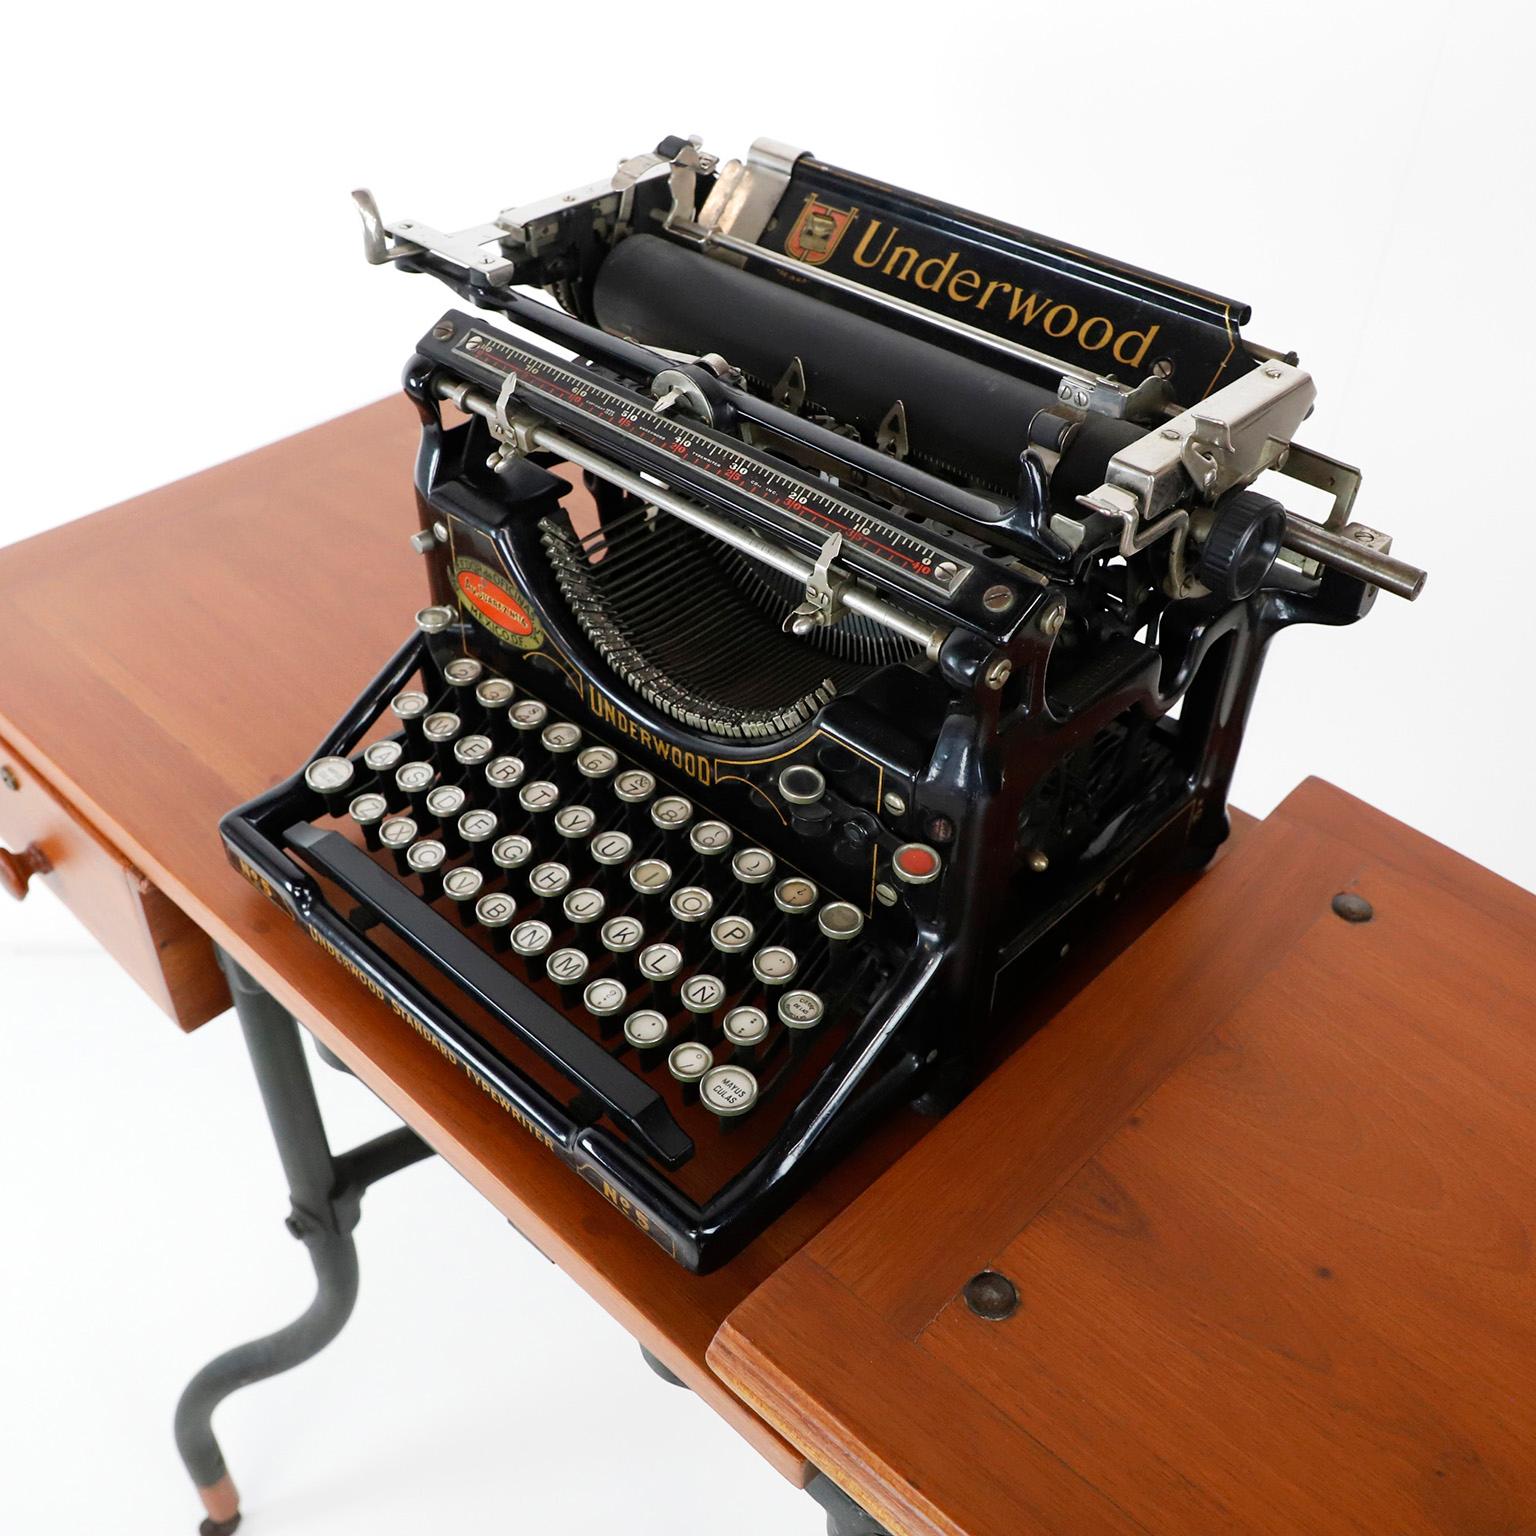 We offer this antique underwood typewriter and table. Both items were found in a place where time stopped. The machine is working perfectly and the table was slightly restored. Both items are in excellent condition.